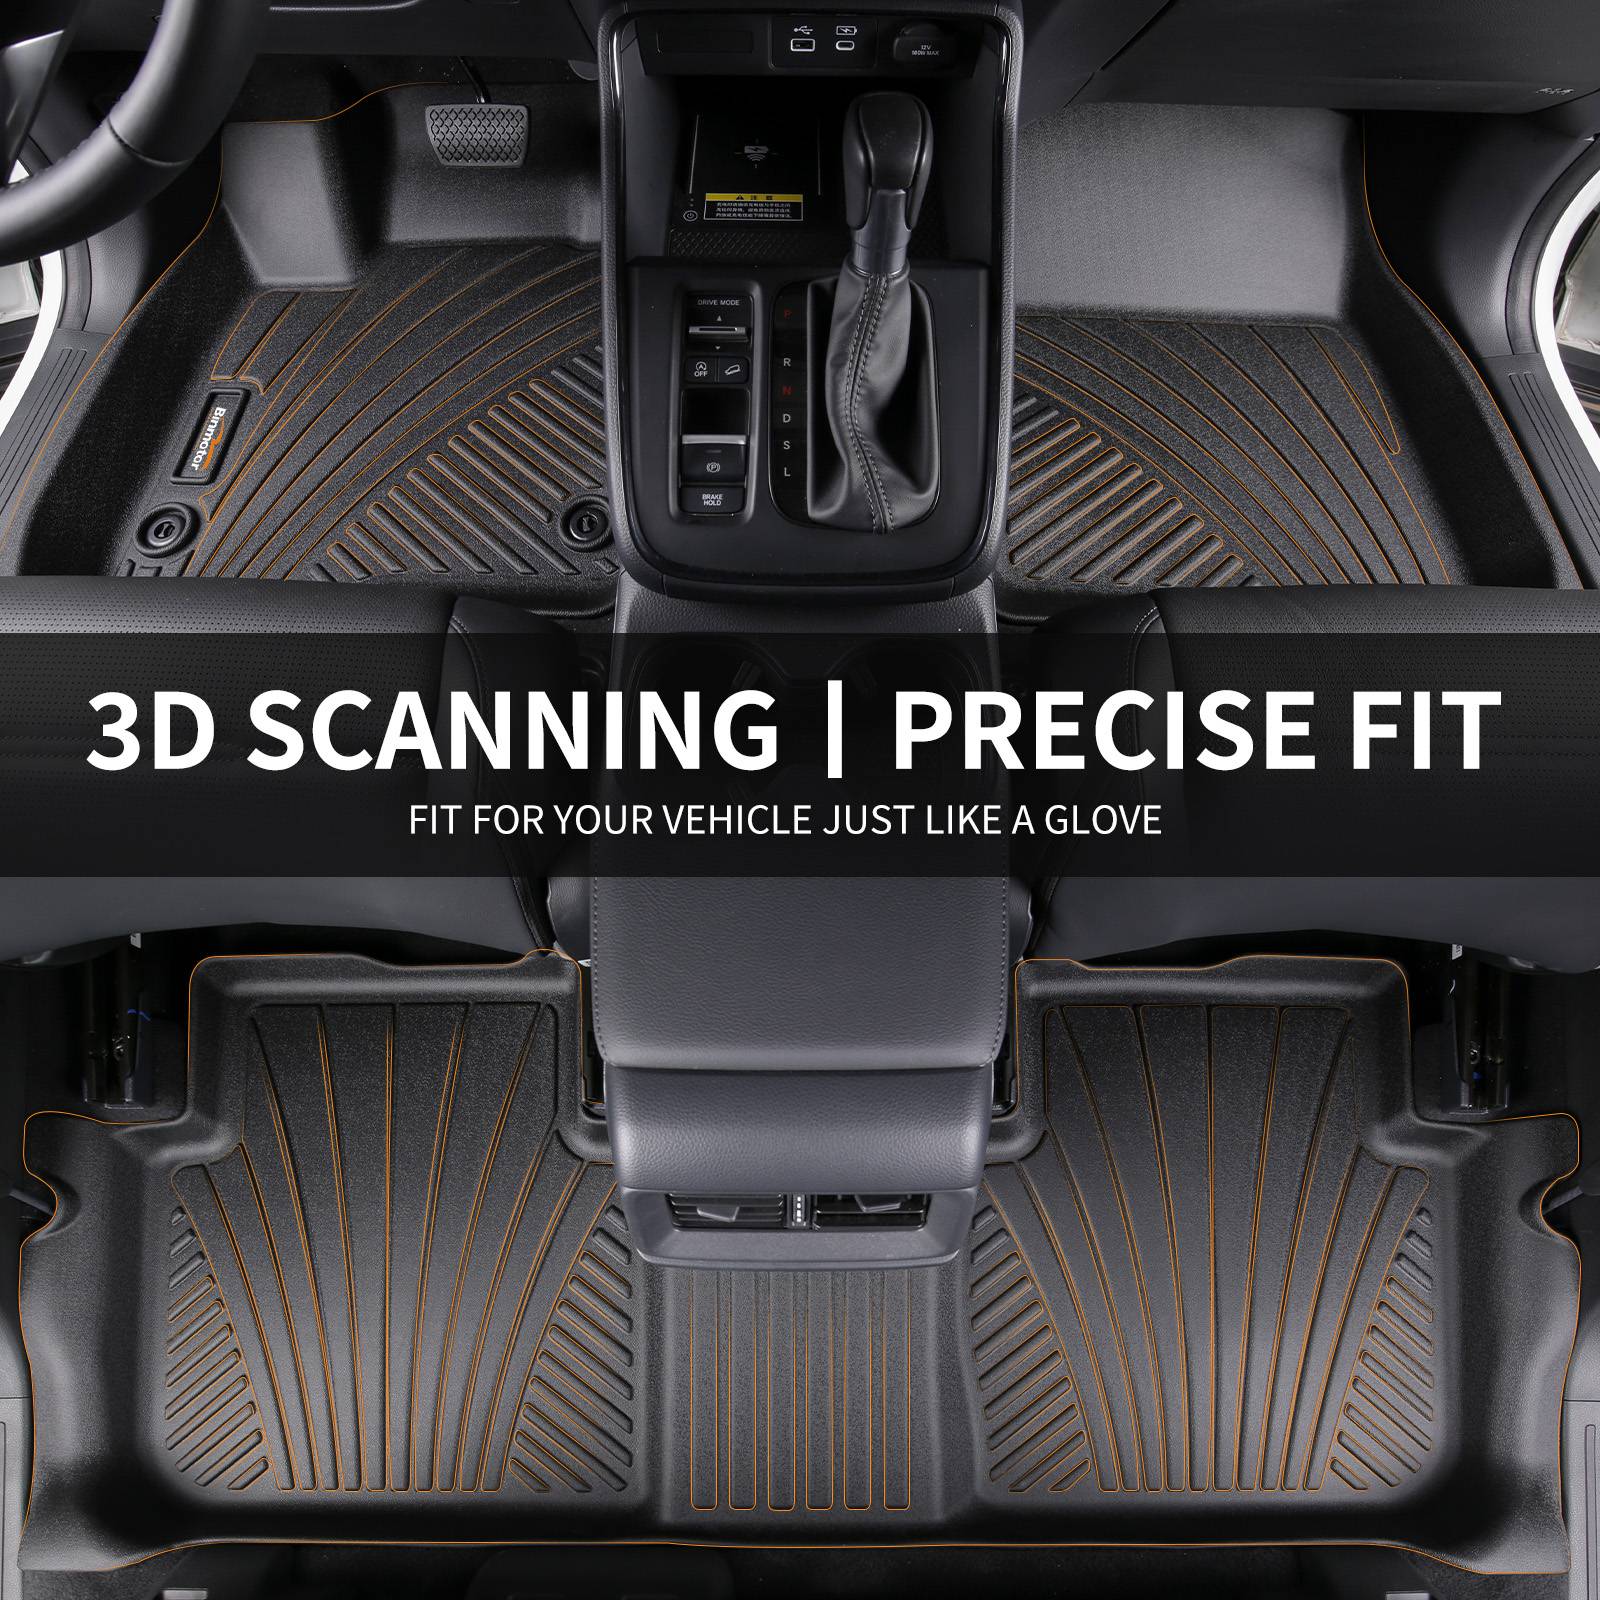 Binmotor-Floor Mats & Cargo Liner Set for Jeep Grand Cherokee (Not for L/WK/4XE), Car Mats Set for Jeep Grand Cherokee, All Weather Car Floor Mats for Grand Cherokee（compatible year 2022-2024）